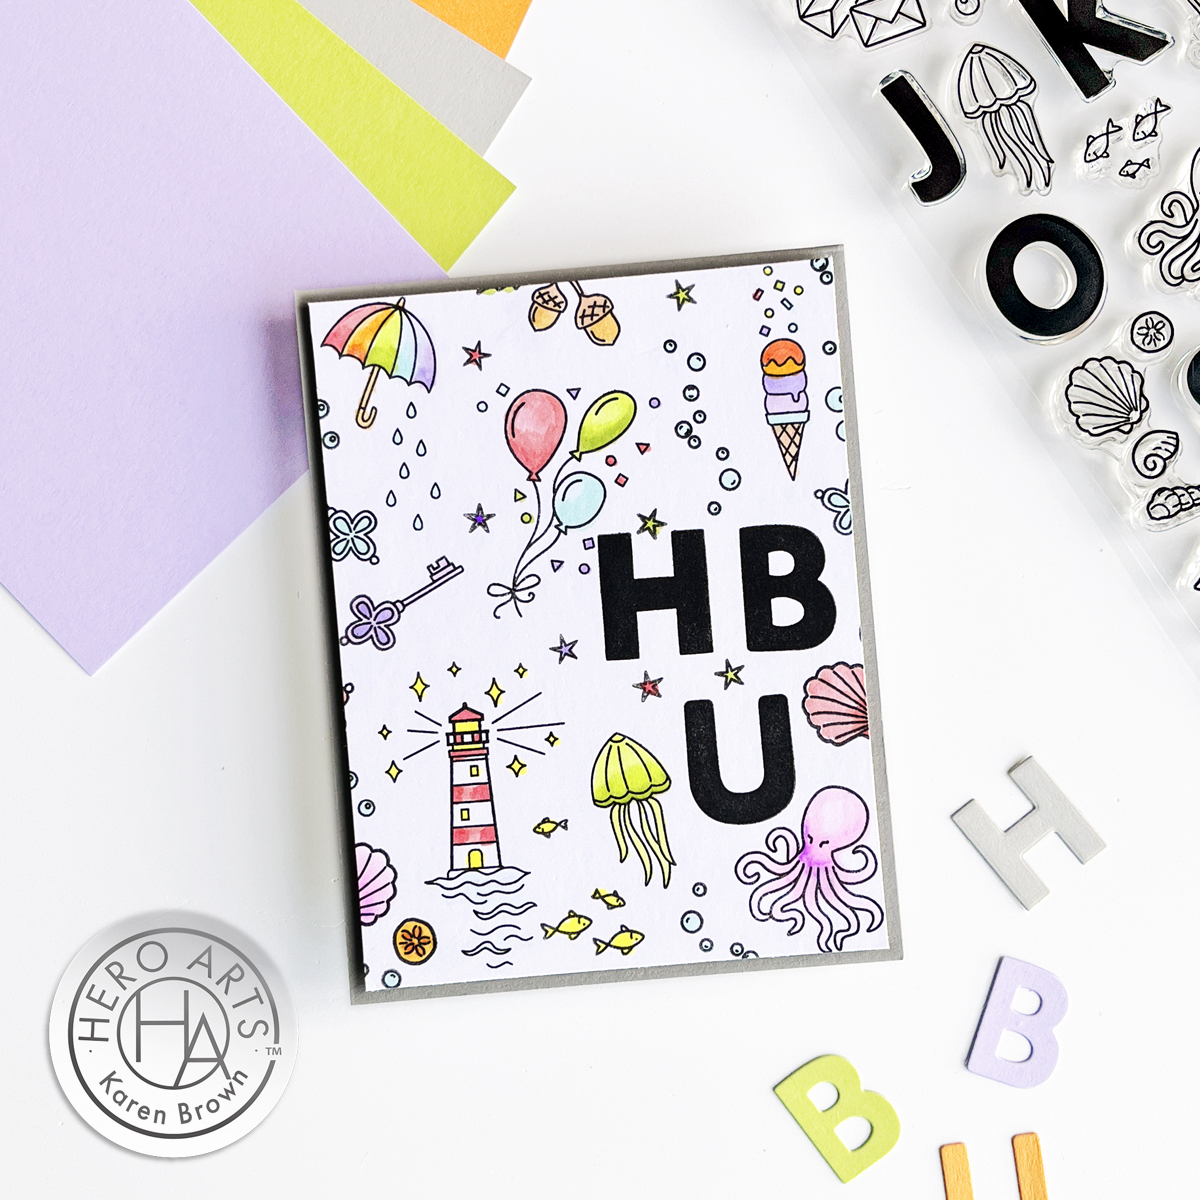 Easy Stamped & Copic Colored Card with Hero Arts Alphabet Stamps and images.